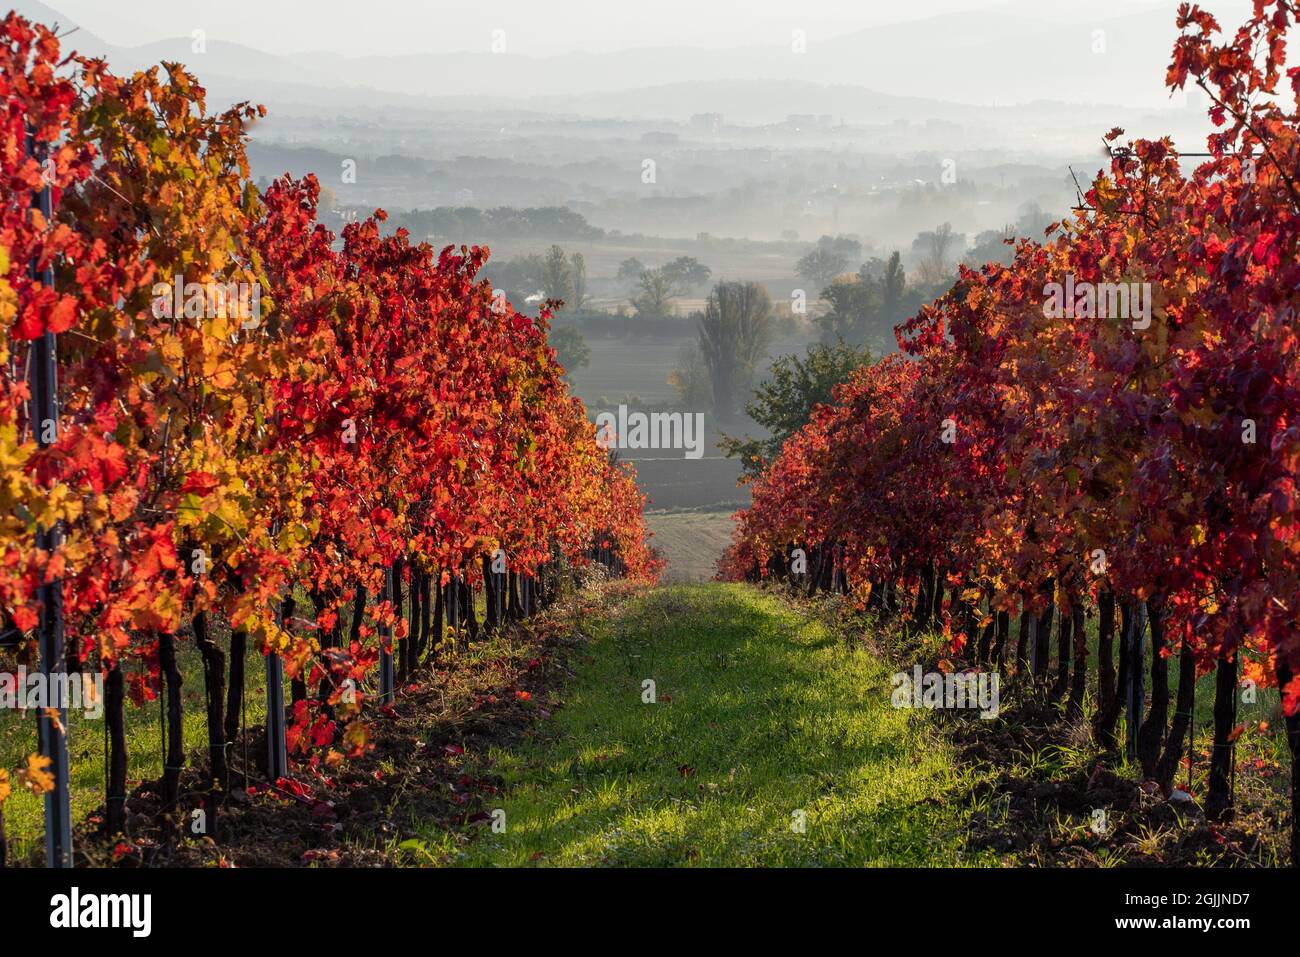 Vineyard in autumn, Italy. Rows with red leaves in the light at sunrise. Stock Photo